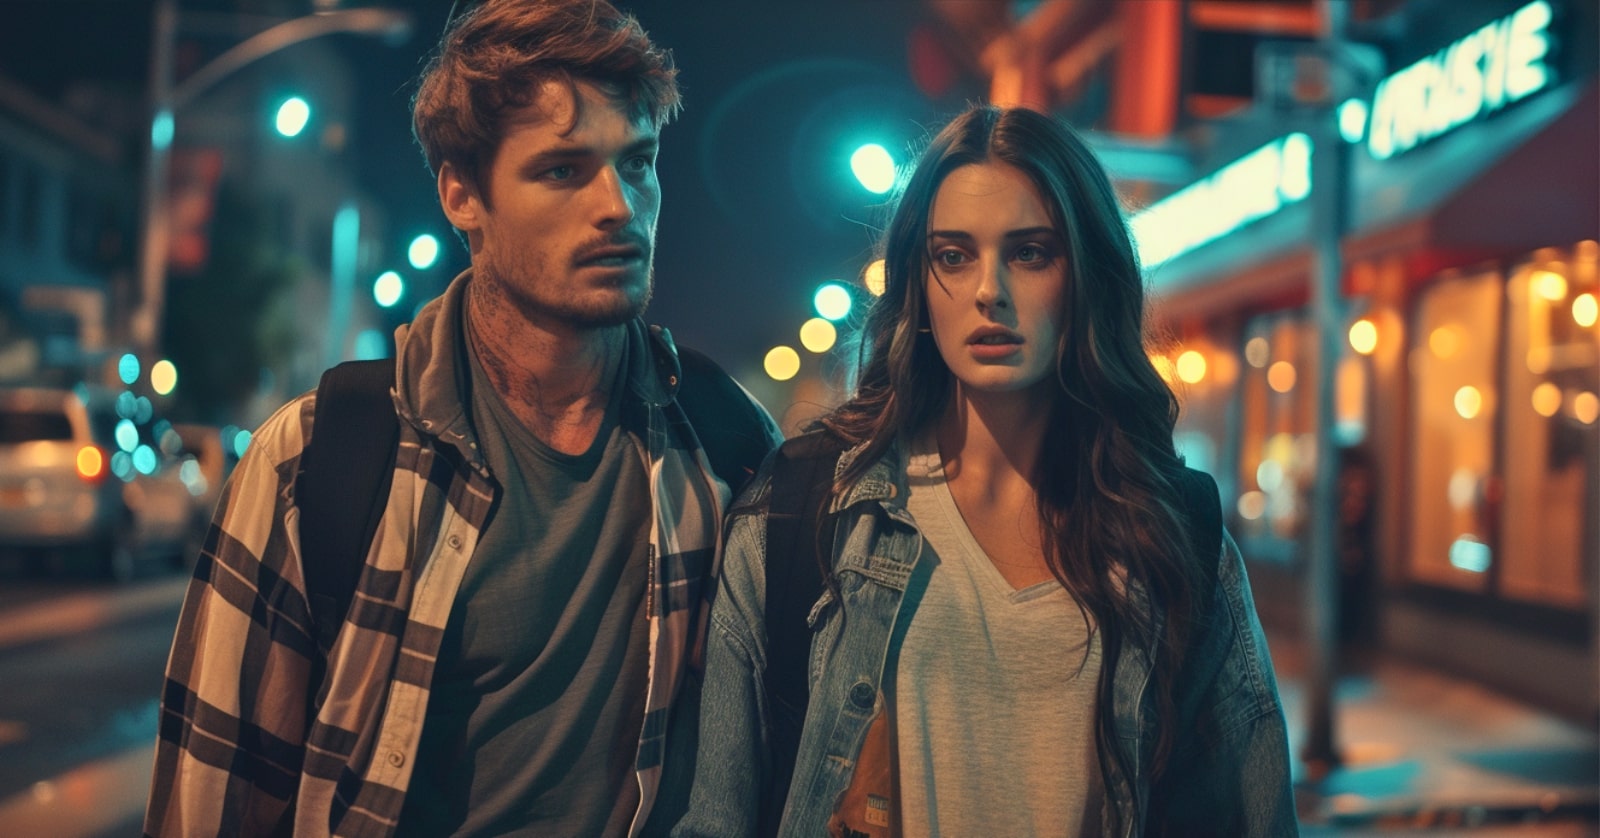 a young man and woman walk down a street at night, the woman has a somewhat pensive scared expression on her face as if the man is controlling her